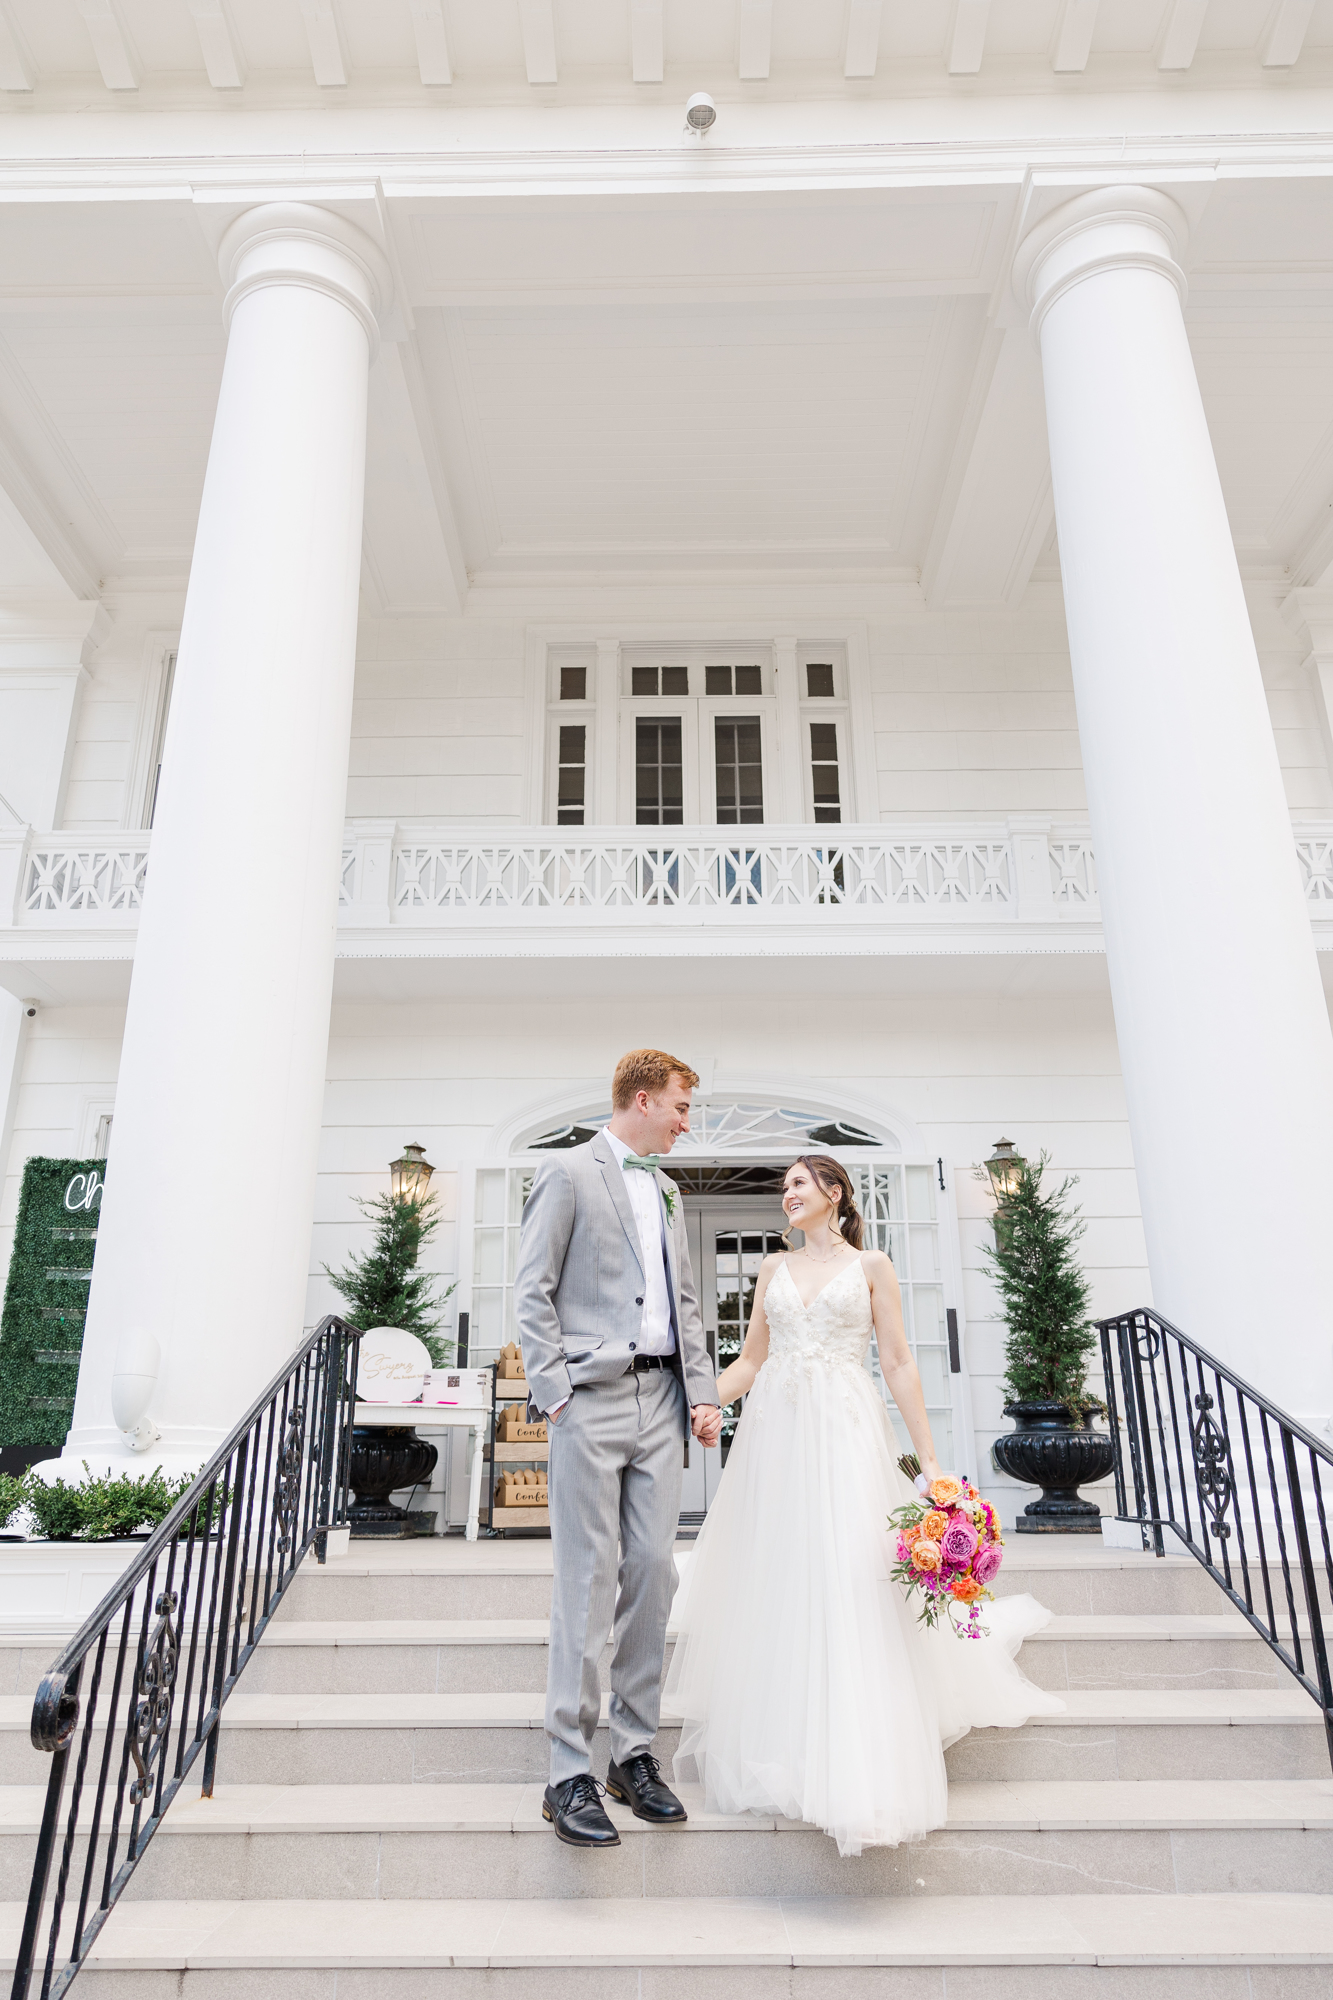 Candid Wedding at Briarcliff Manor in Westchester County